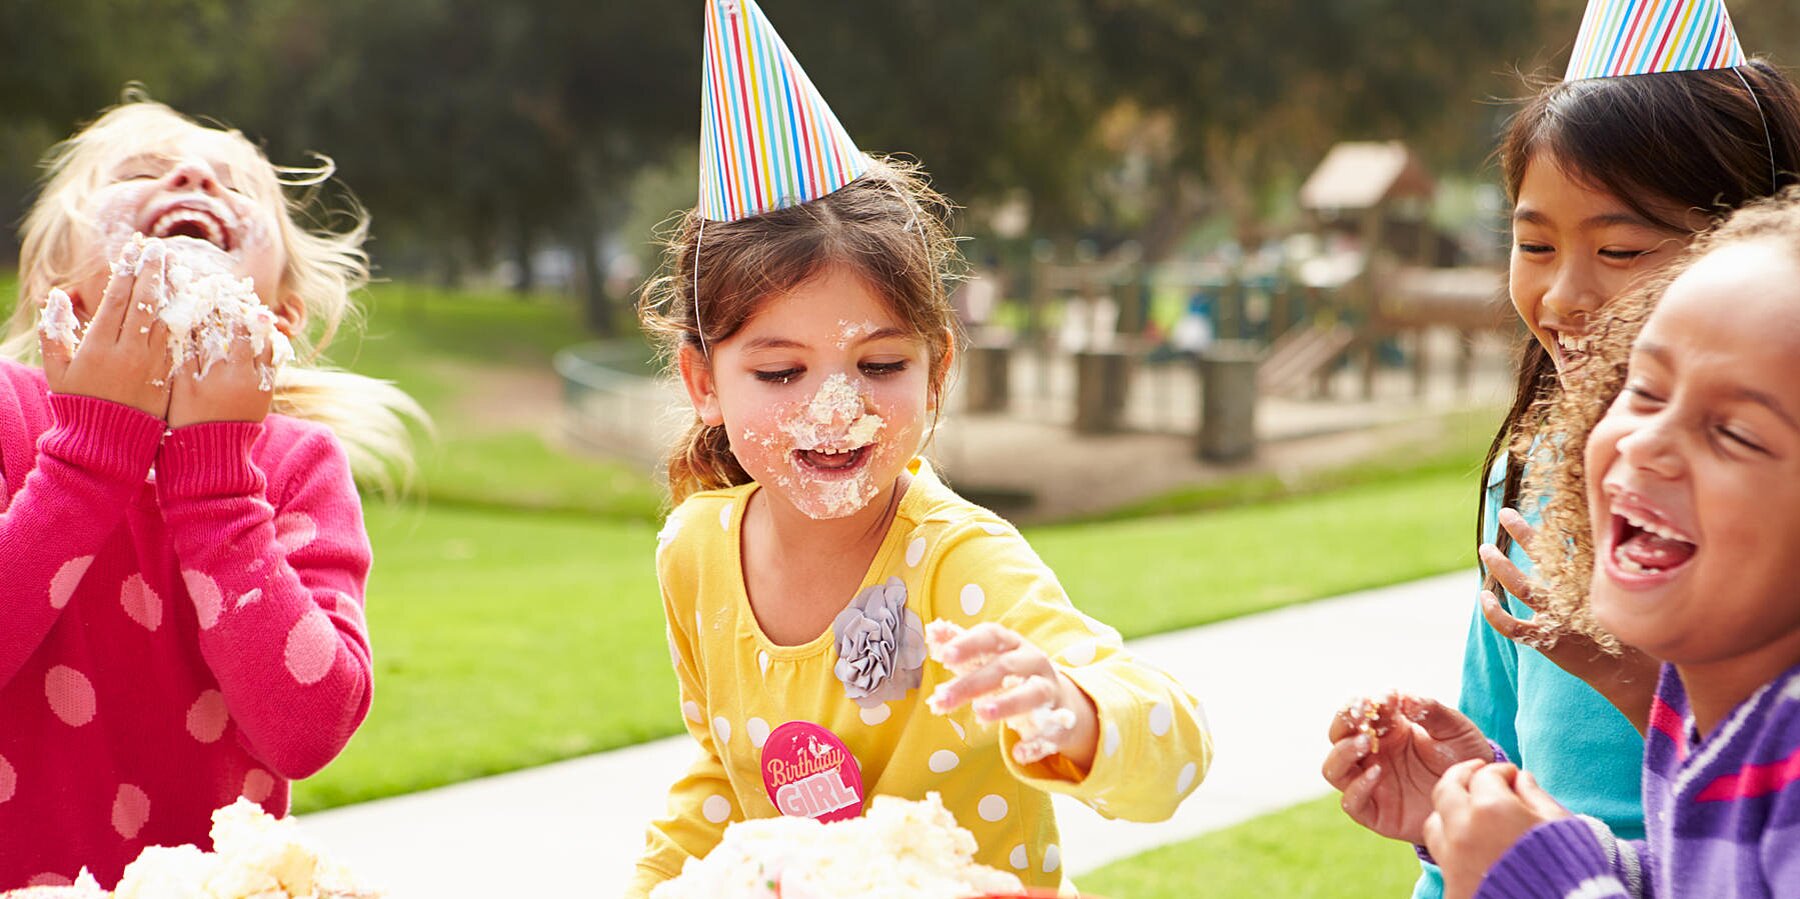 Hassle-free Ideas to Add a Little Extra to Your Birthday Menu